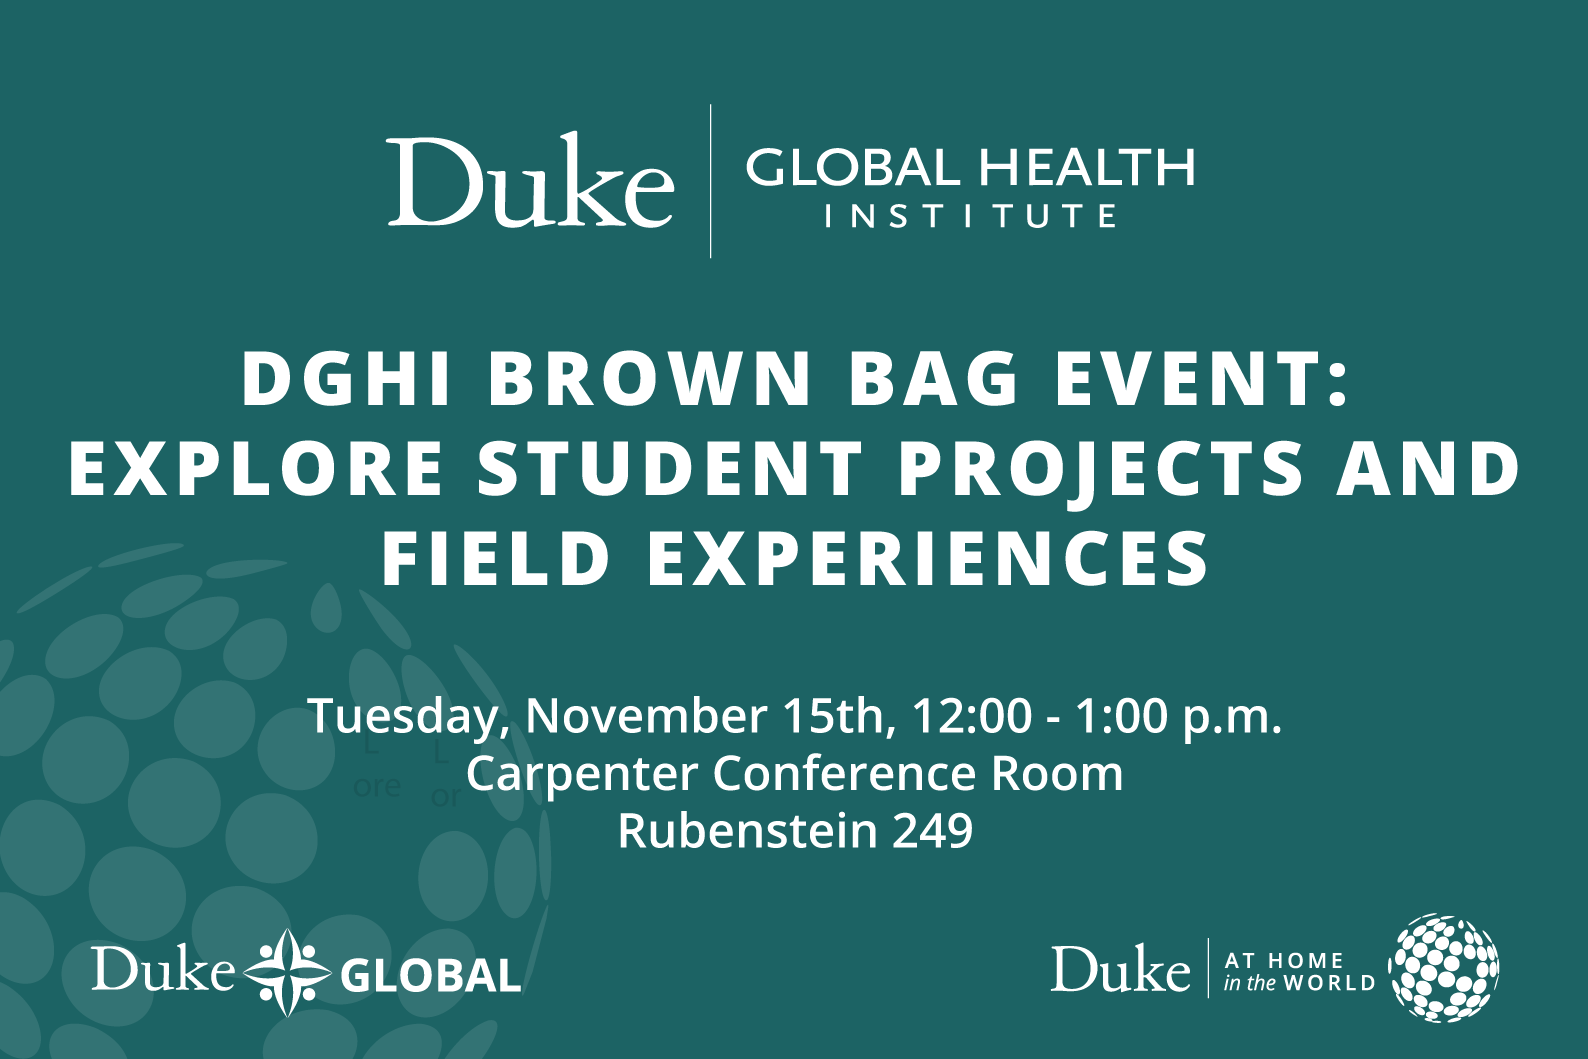 DGHI Brown Bag Event: Explore Student Projects and Field Experiences Tuesday, November 15th, 12:00 - 1:00 p.m. Carpenter Conference Room (Rubenstein 249)